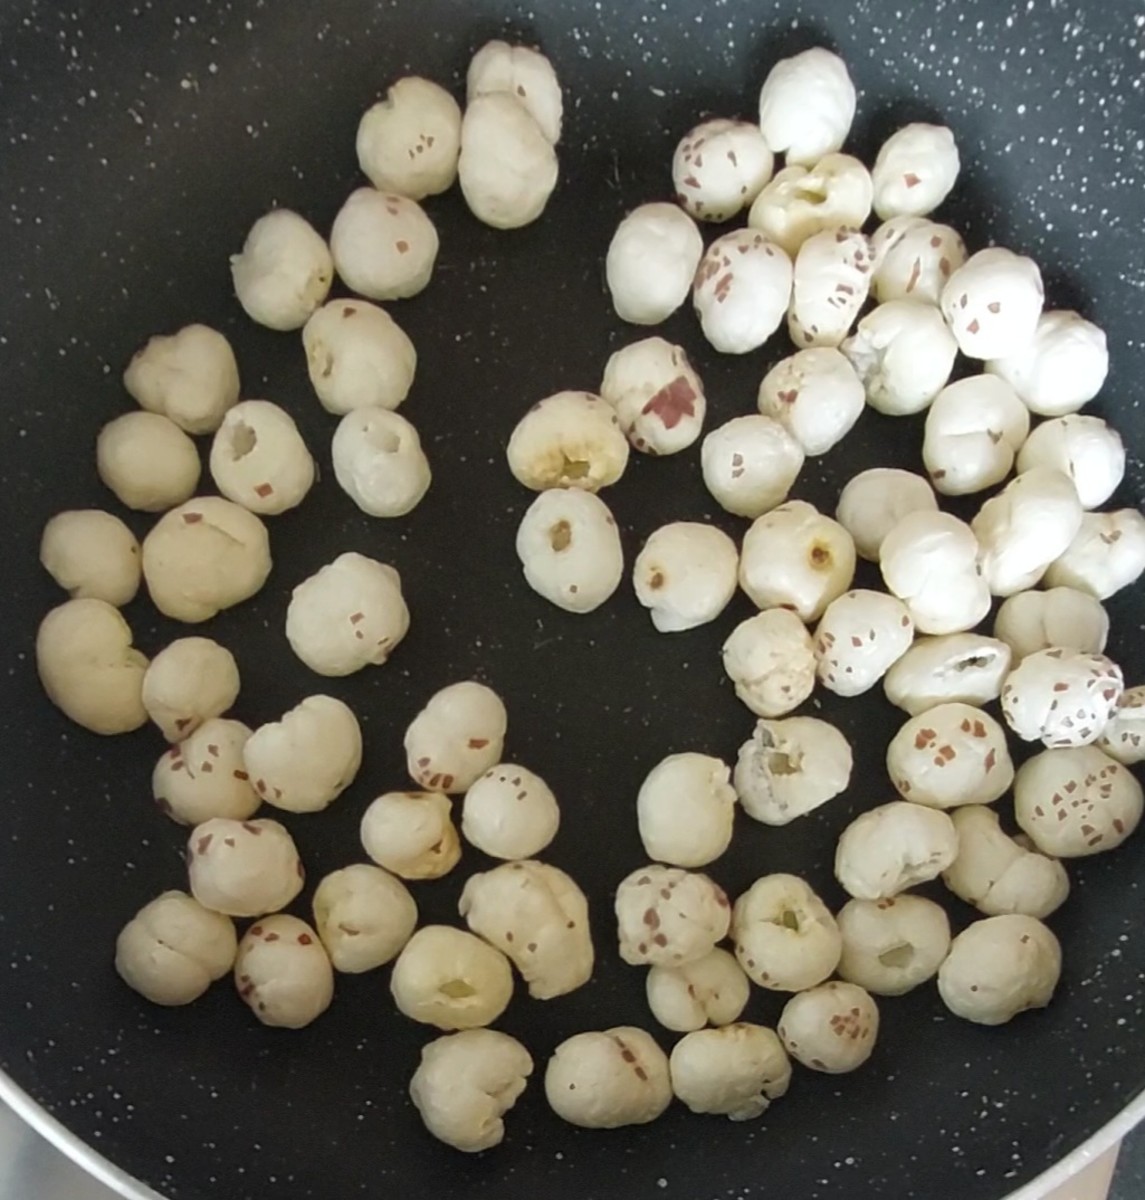 In a pan, add 1 cup of lotus seeds or makhana. Dry-fry over low flame for 2-3 minutes or till crispy (do not burn the seeds). Once done, switch off the flame.